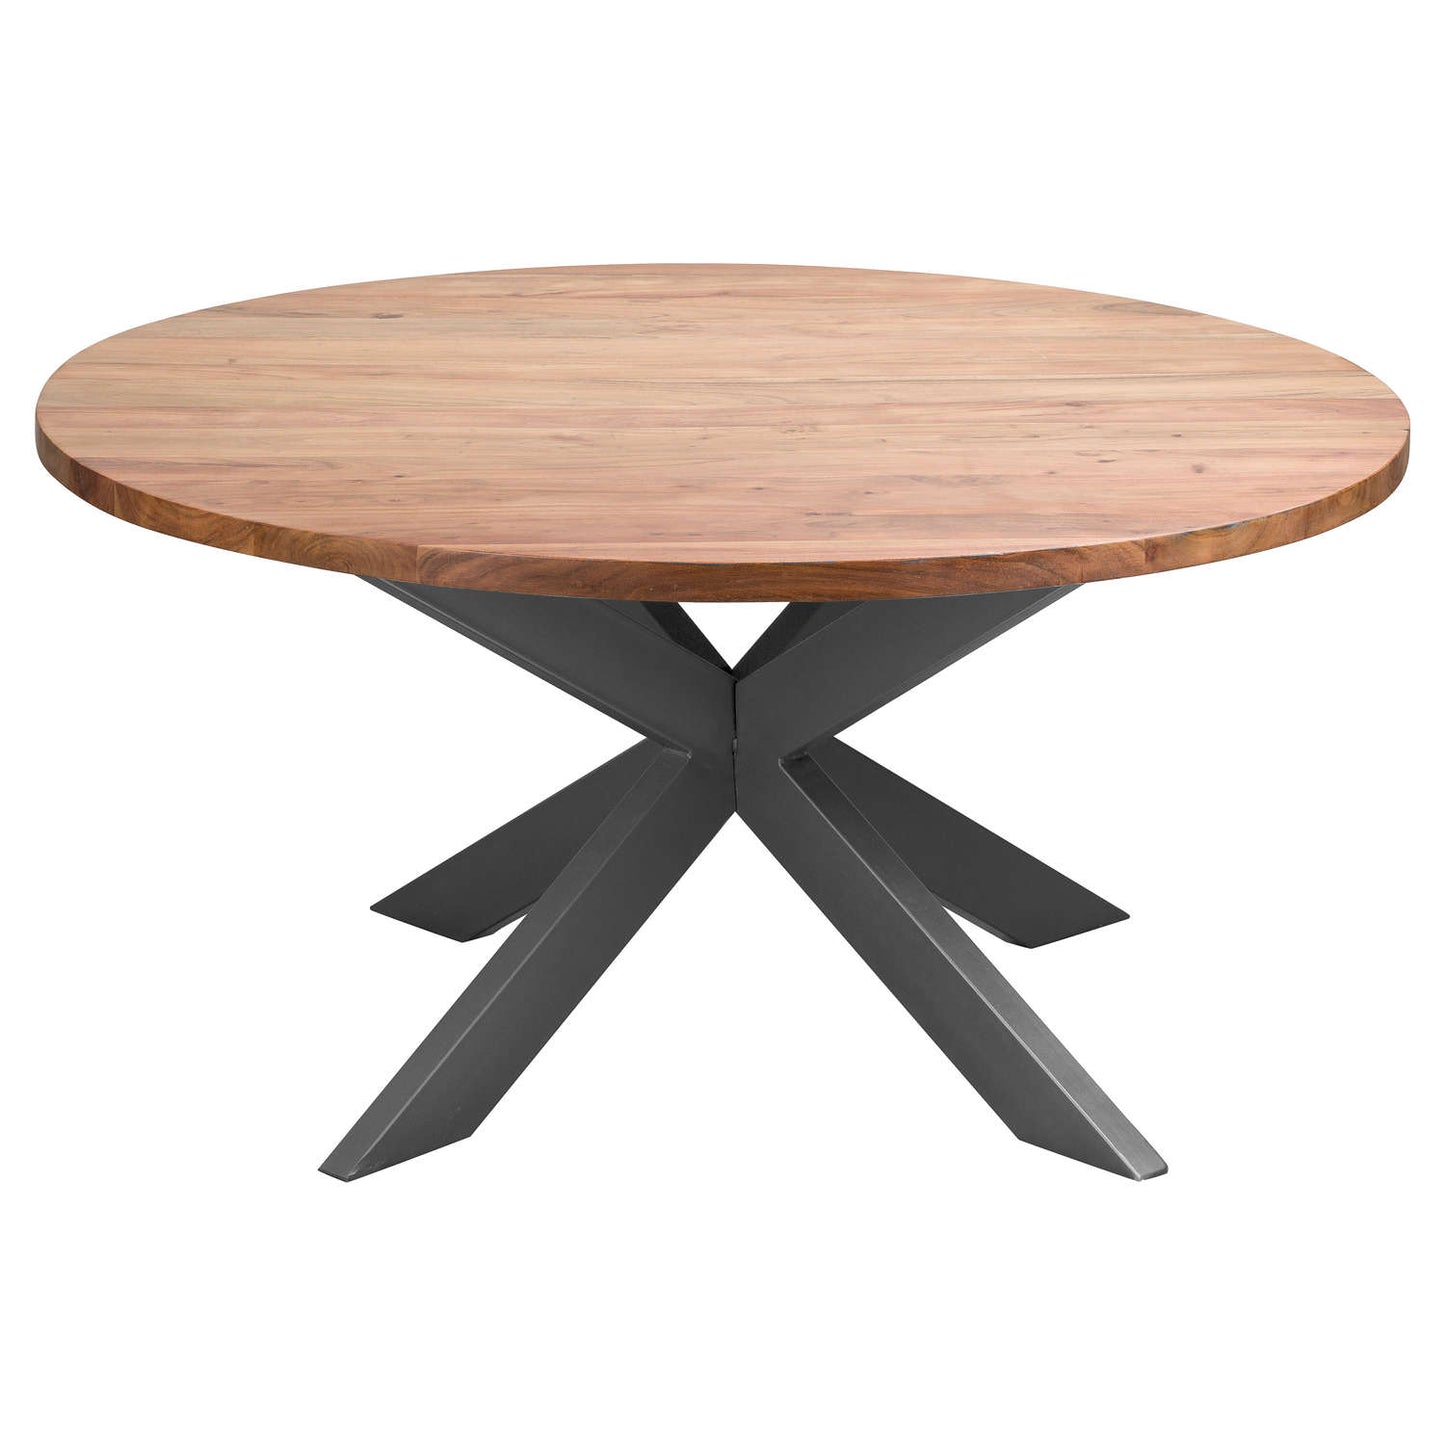 Hill Interiors Live Edge Collection Large Round Dining Table